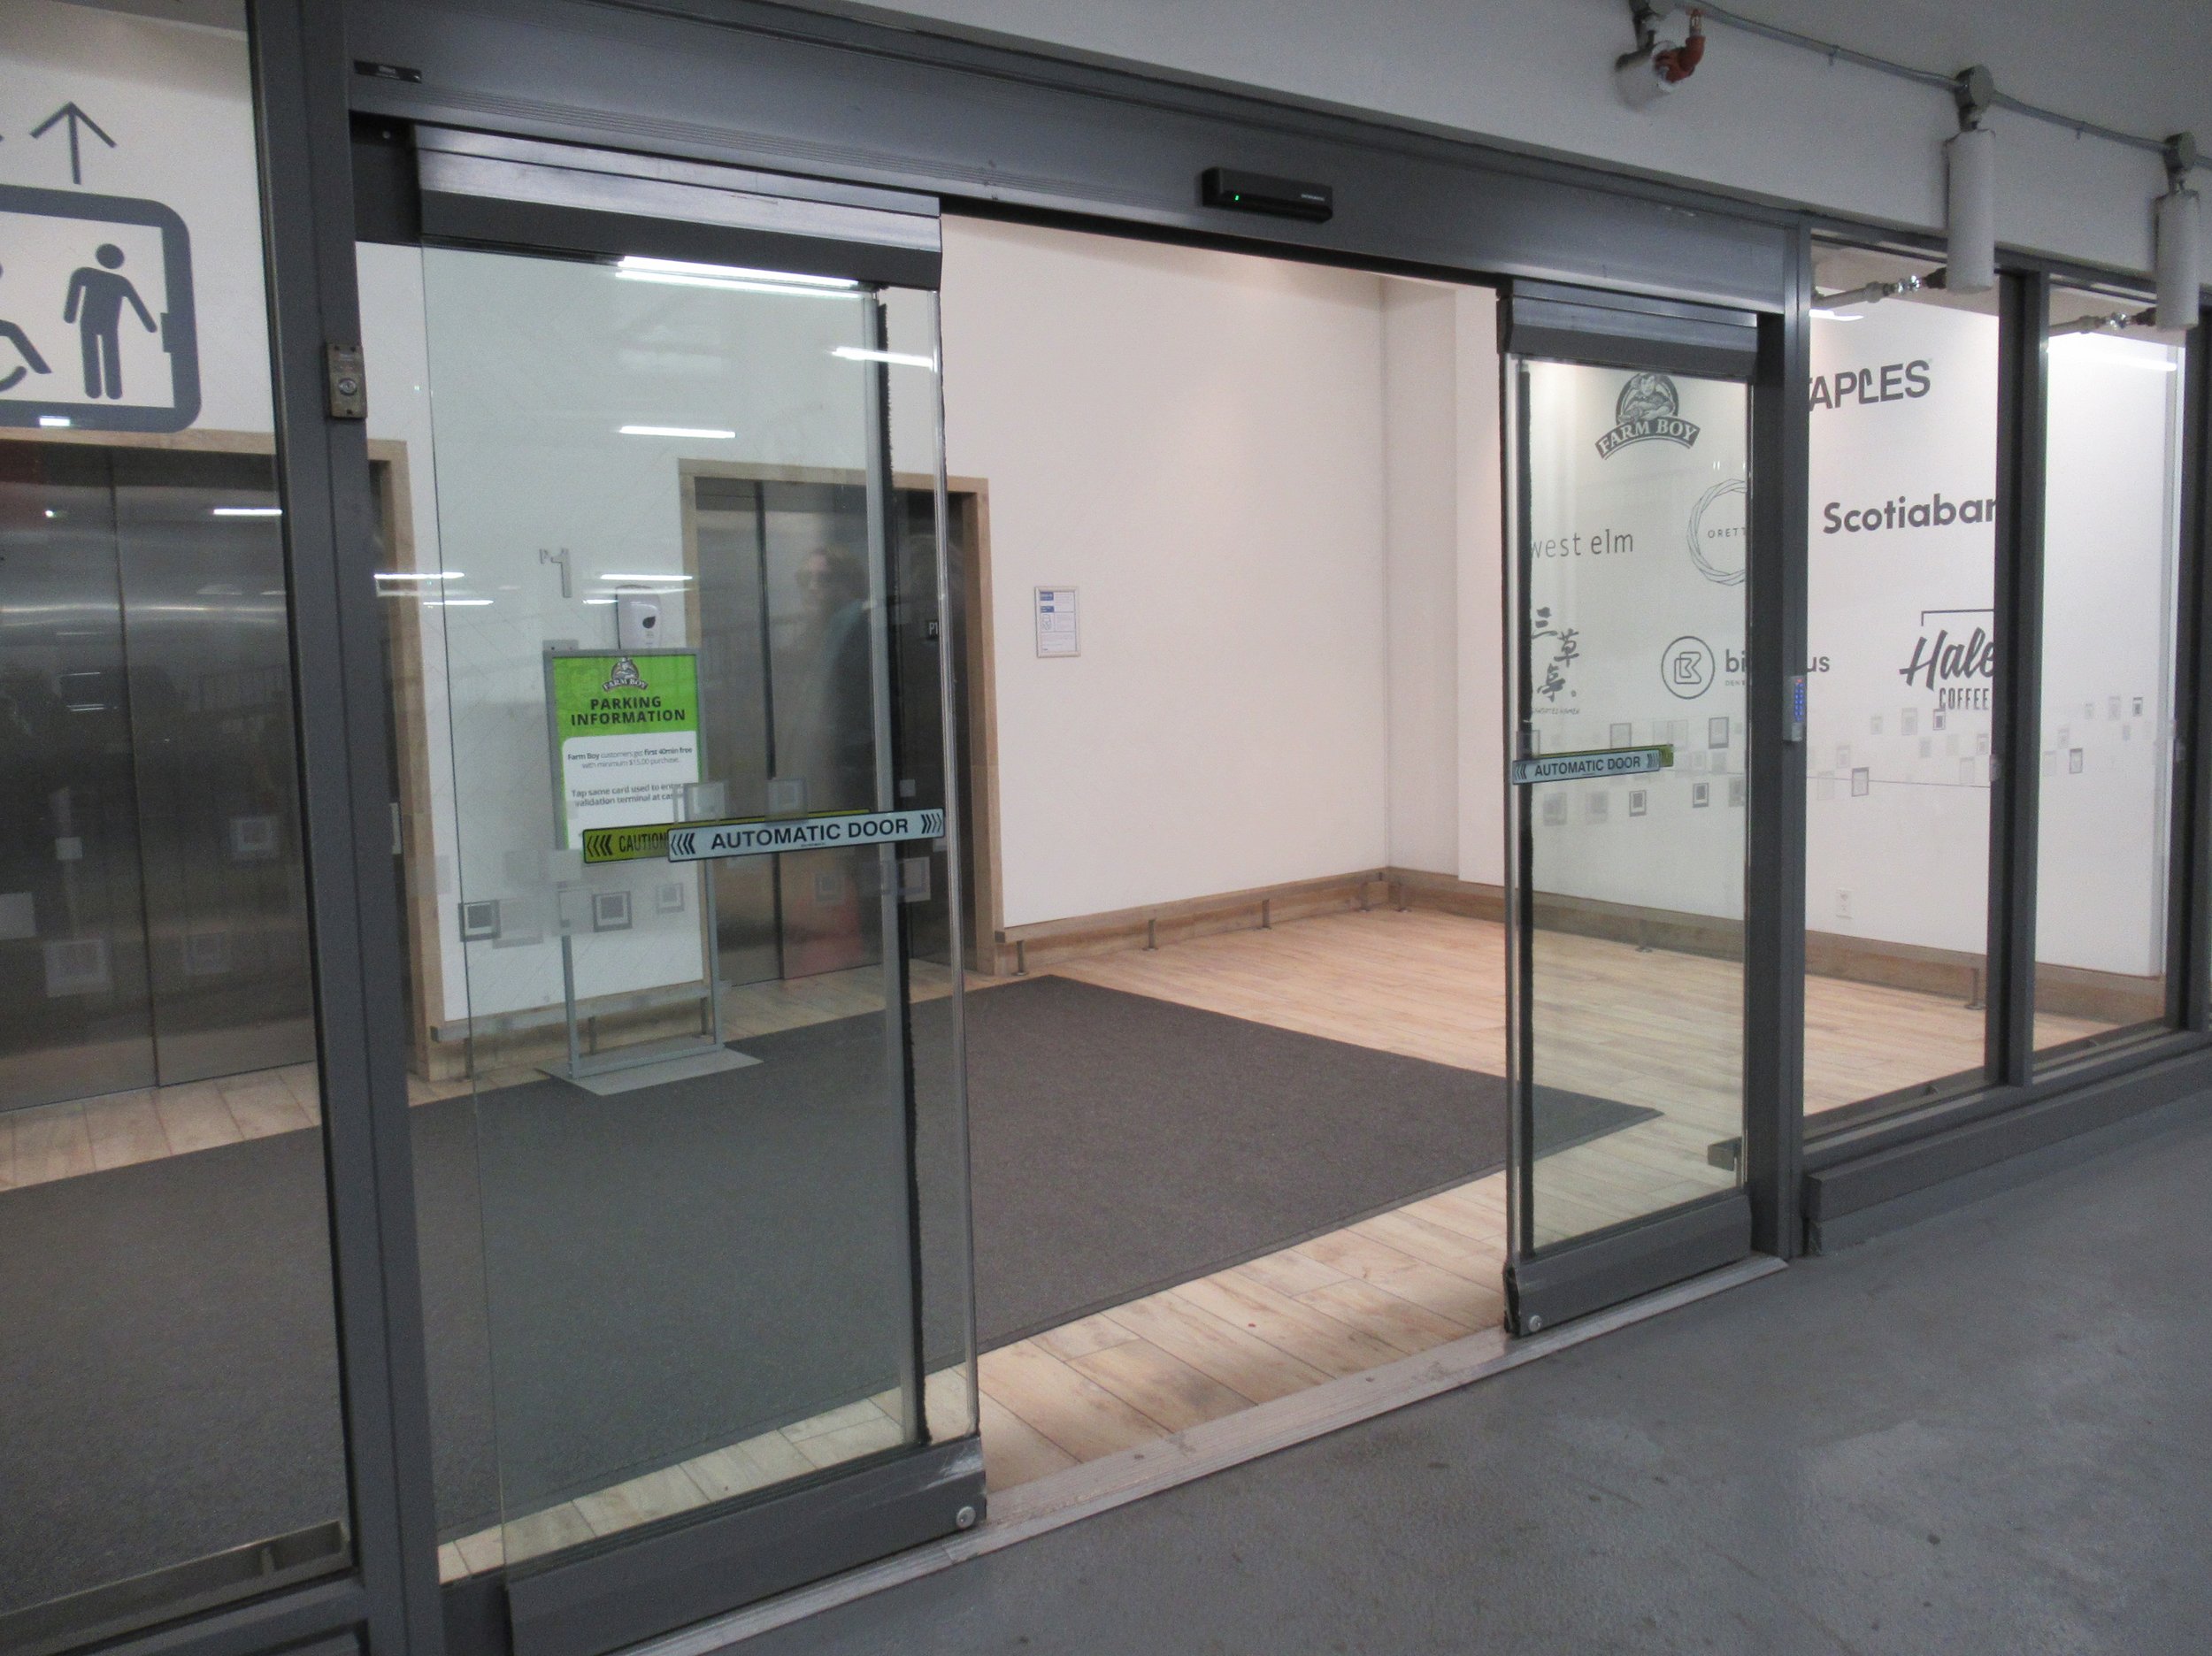 Automatic sliding doors leading you to the elevators to access the second floor